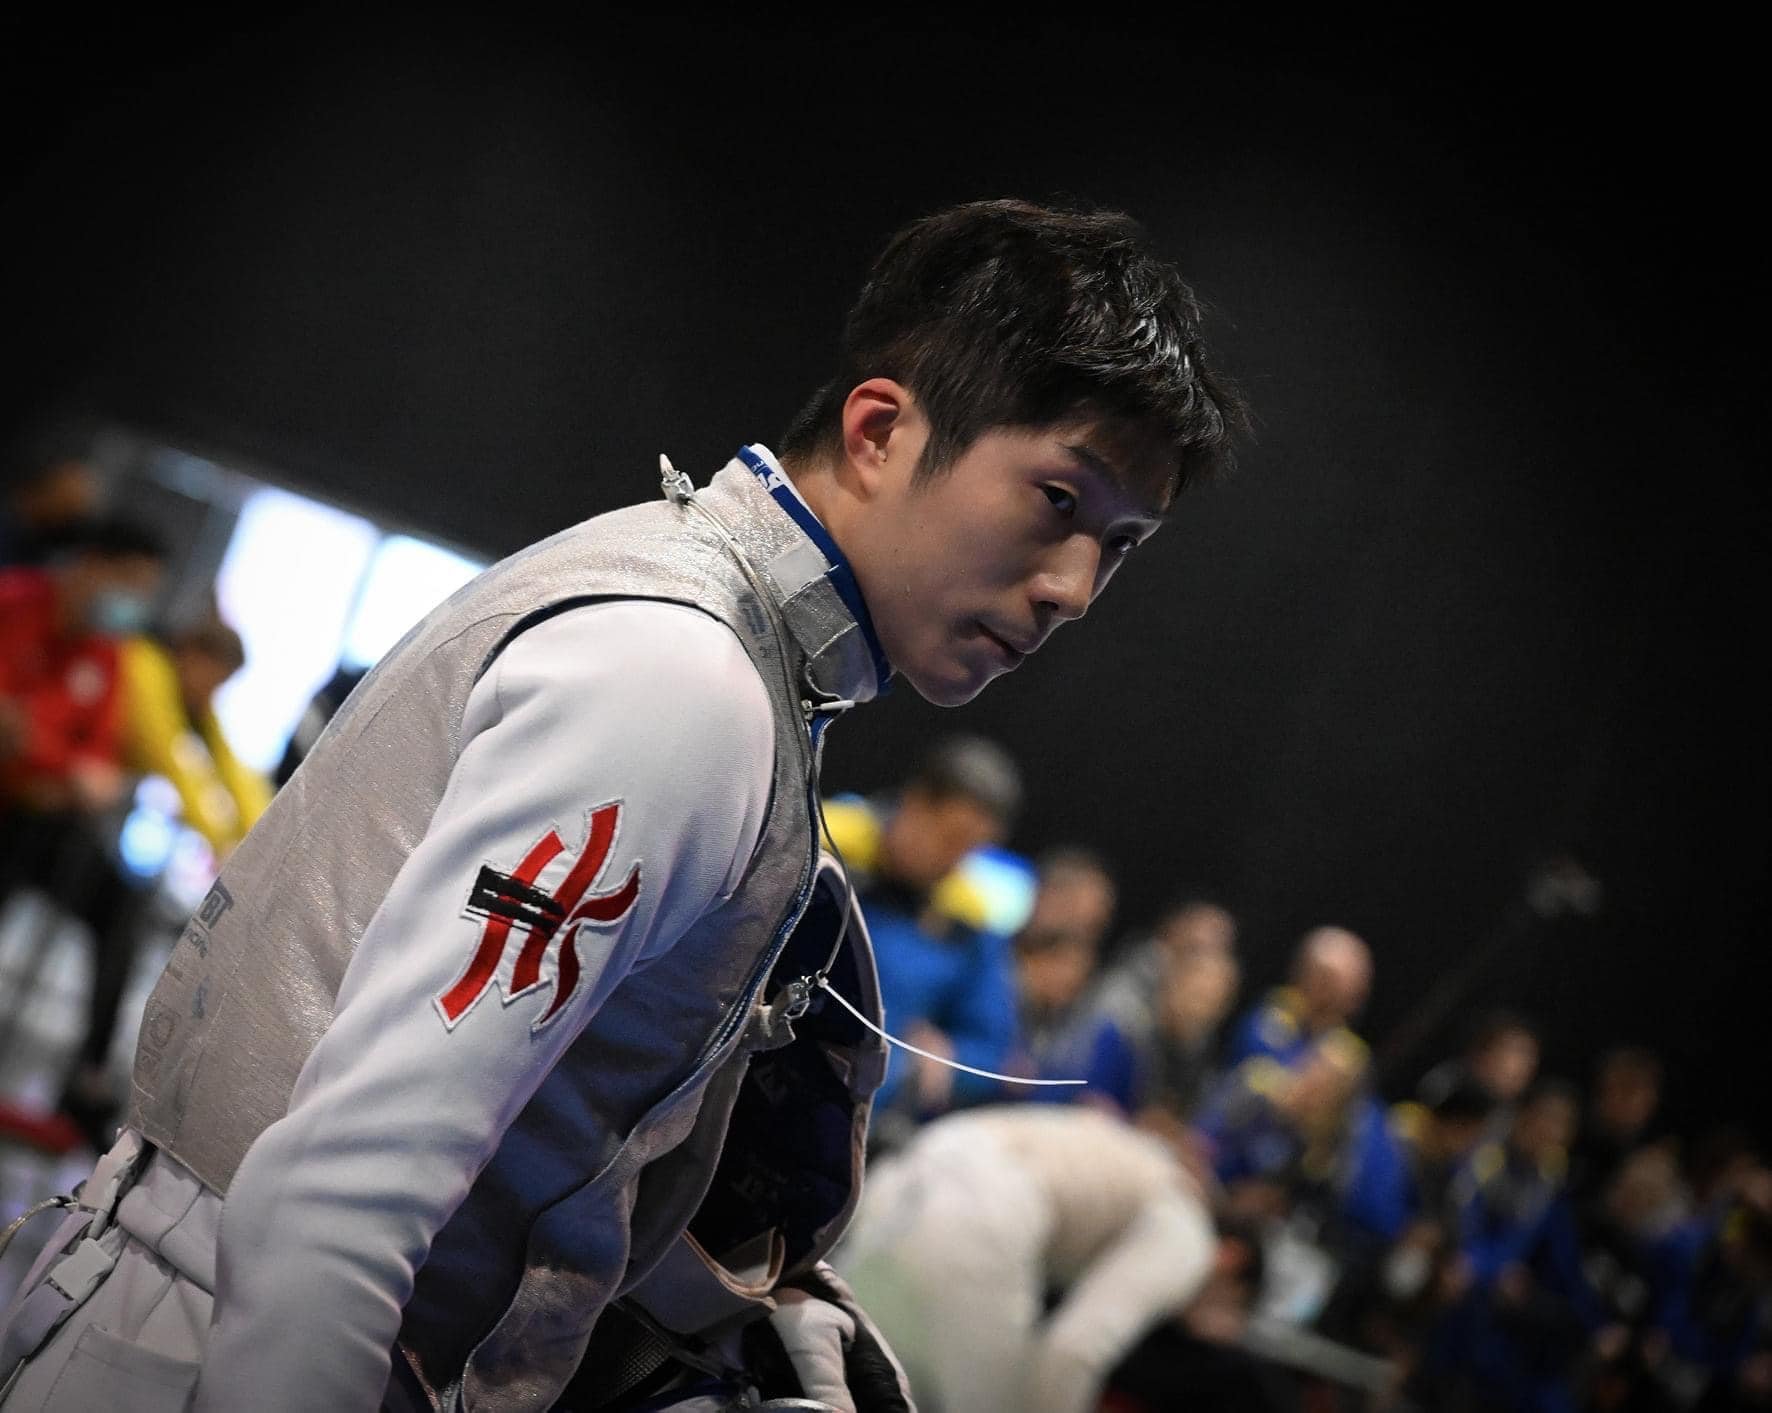 Newly crowned world No 1 fencer Edgar Cheung seen at the Belgrade World Cup in April. Photo: FIE